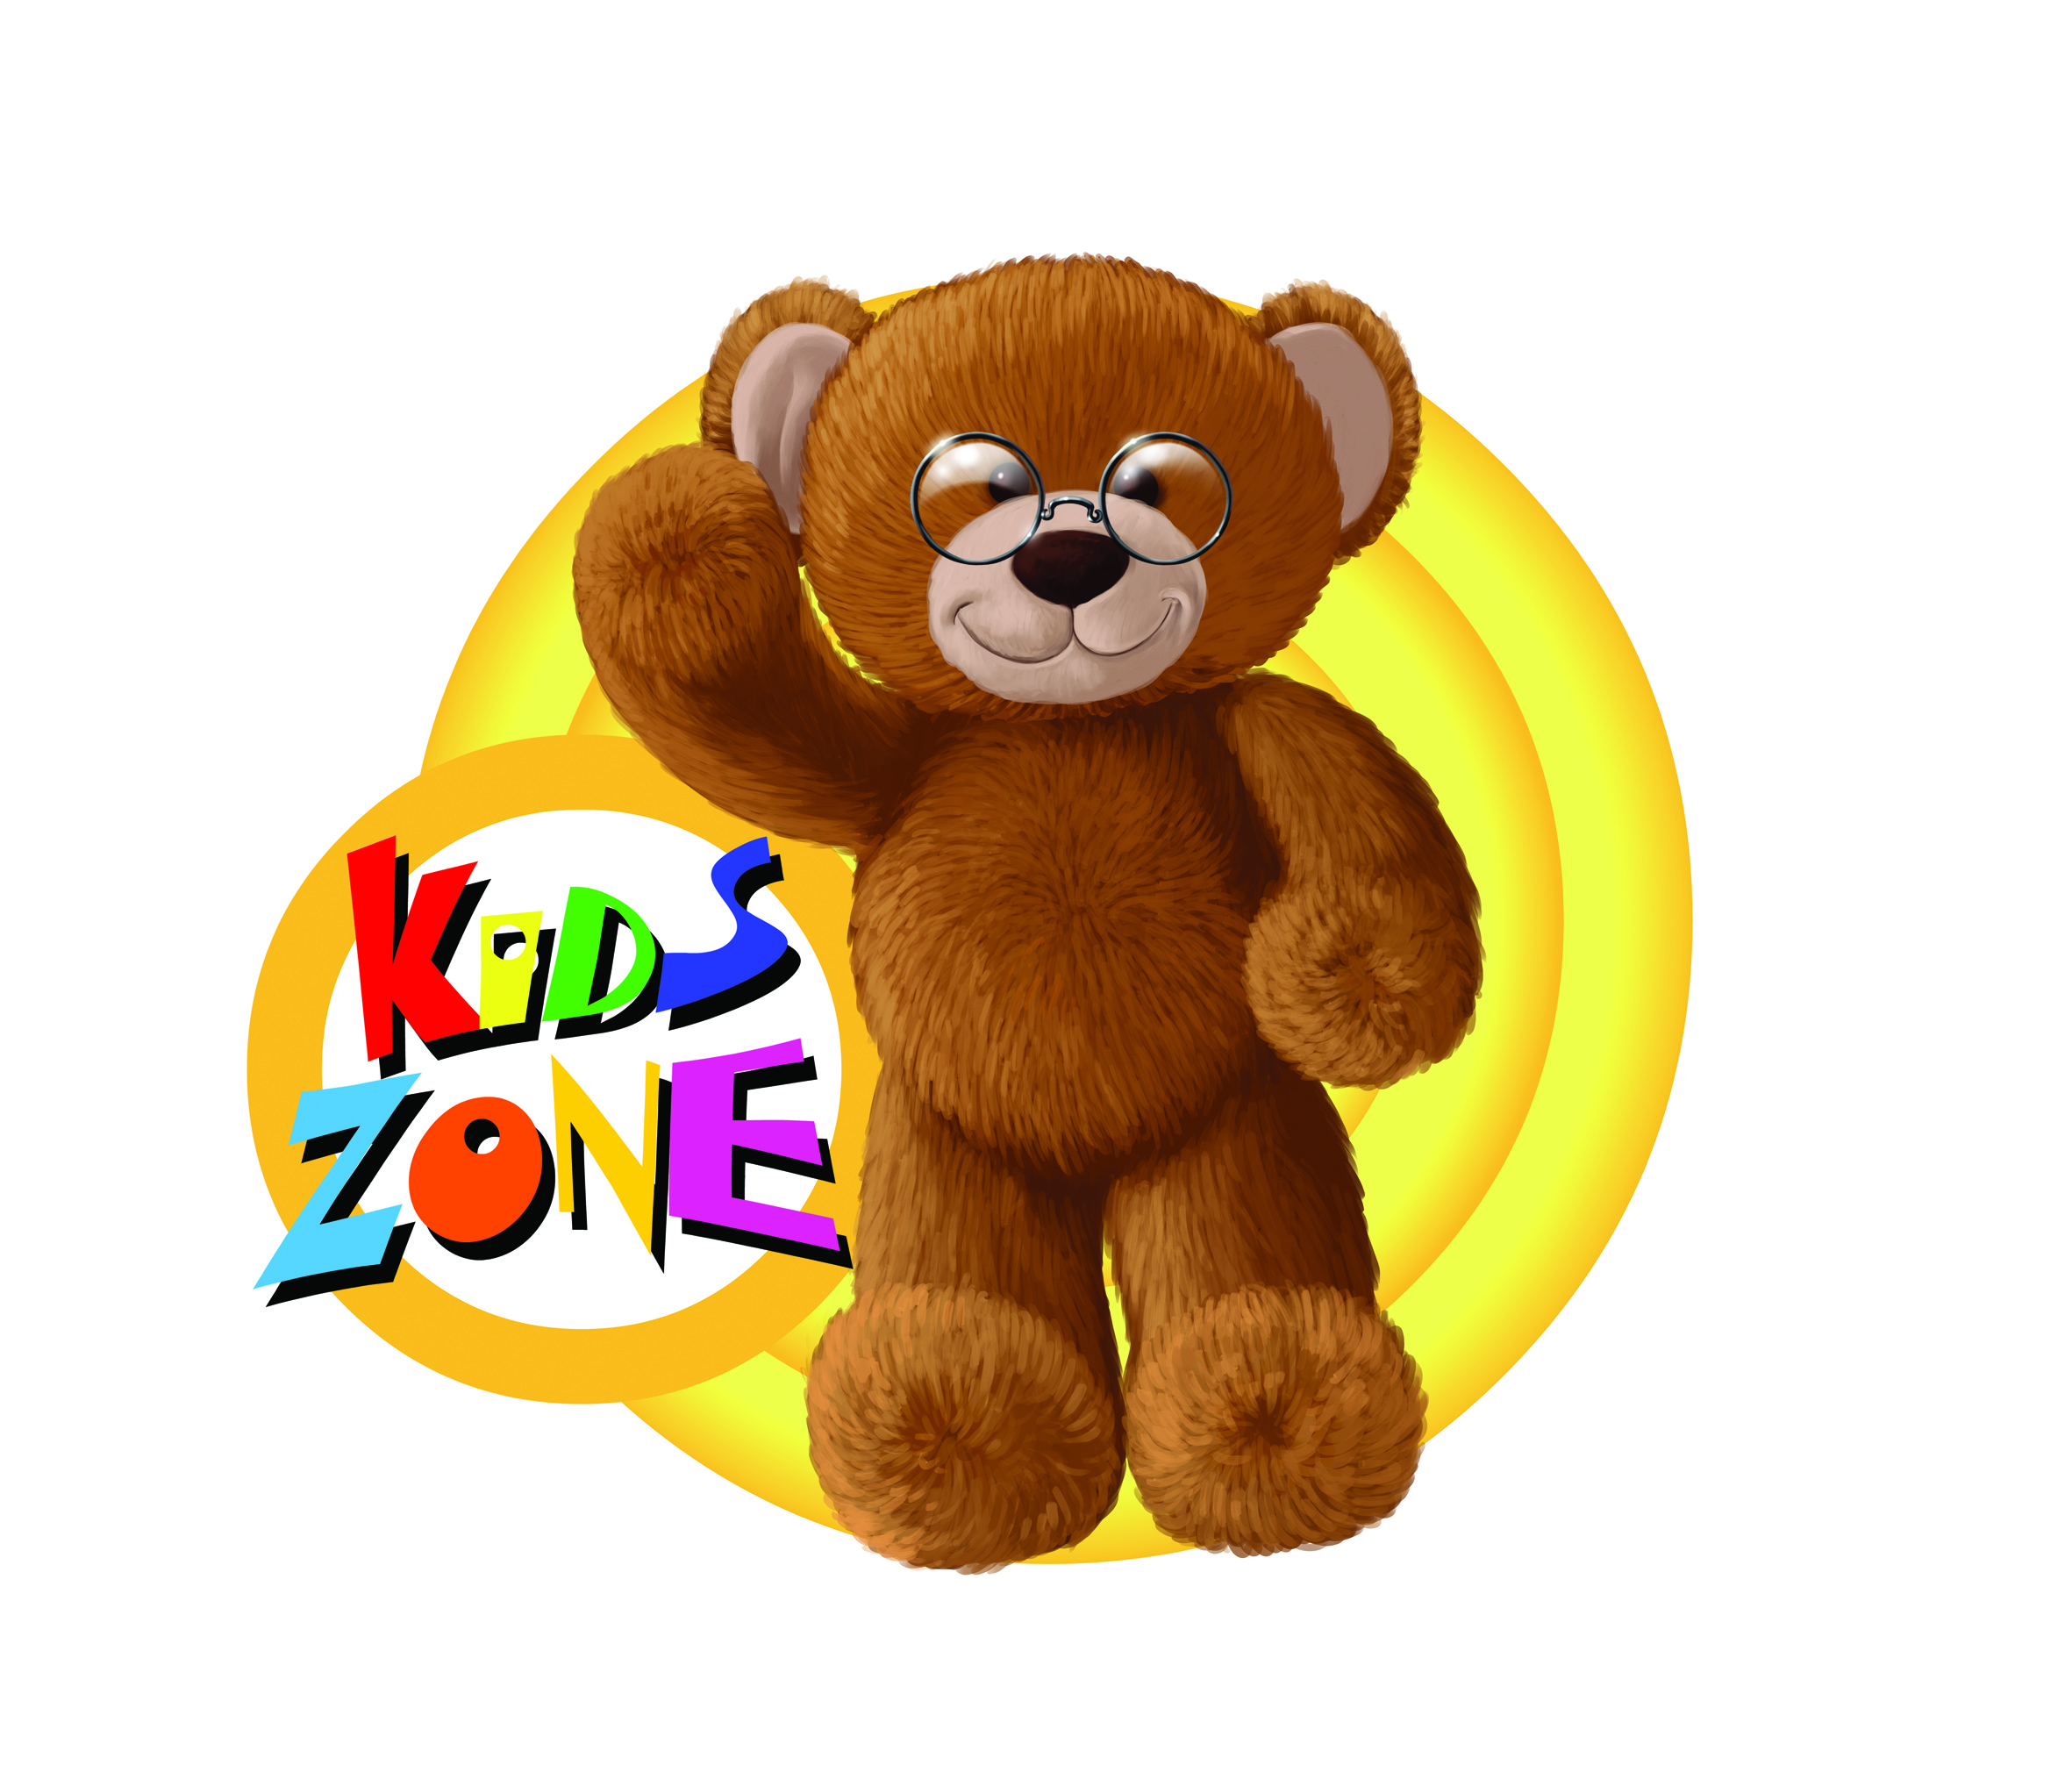 Vision Express – kids zone